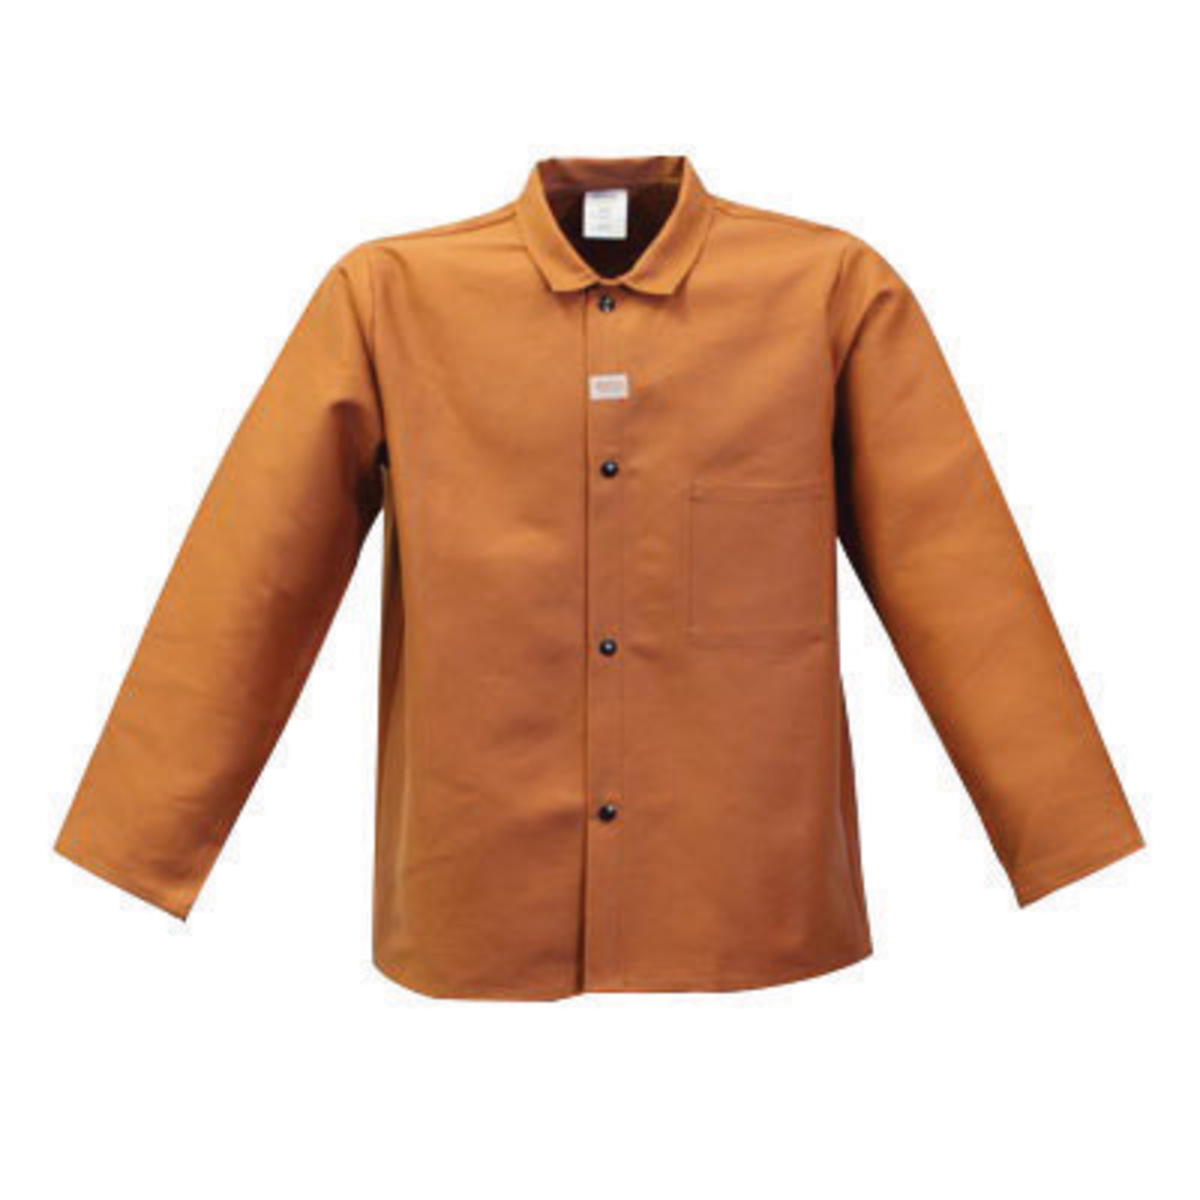 Stanco Safety Products™ X-Large Rust Brown Cotton Flame Resistant Welding Jacket With Snap Closure And Leather Sleeves